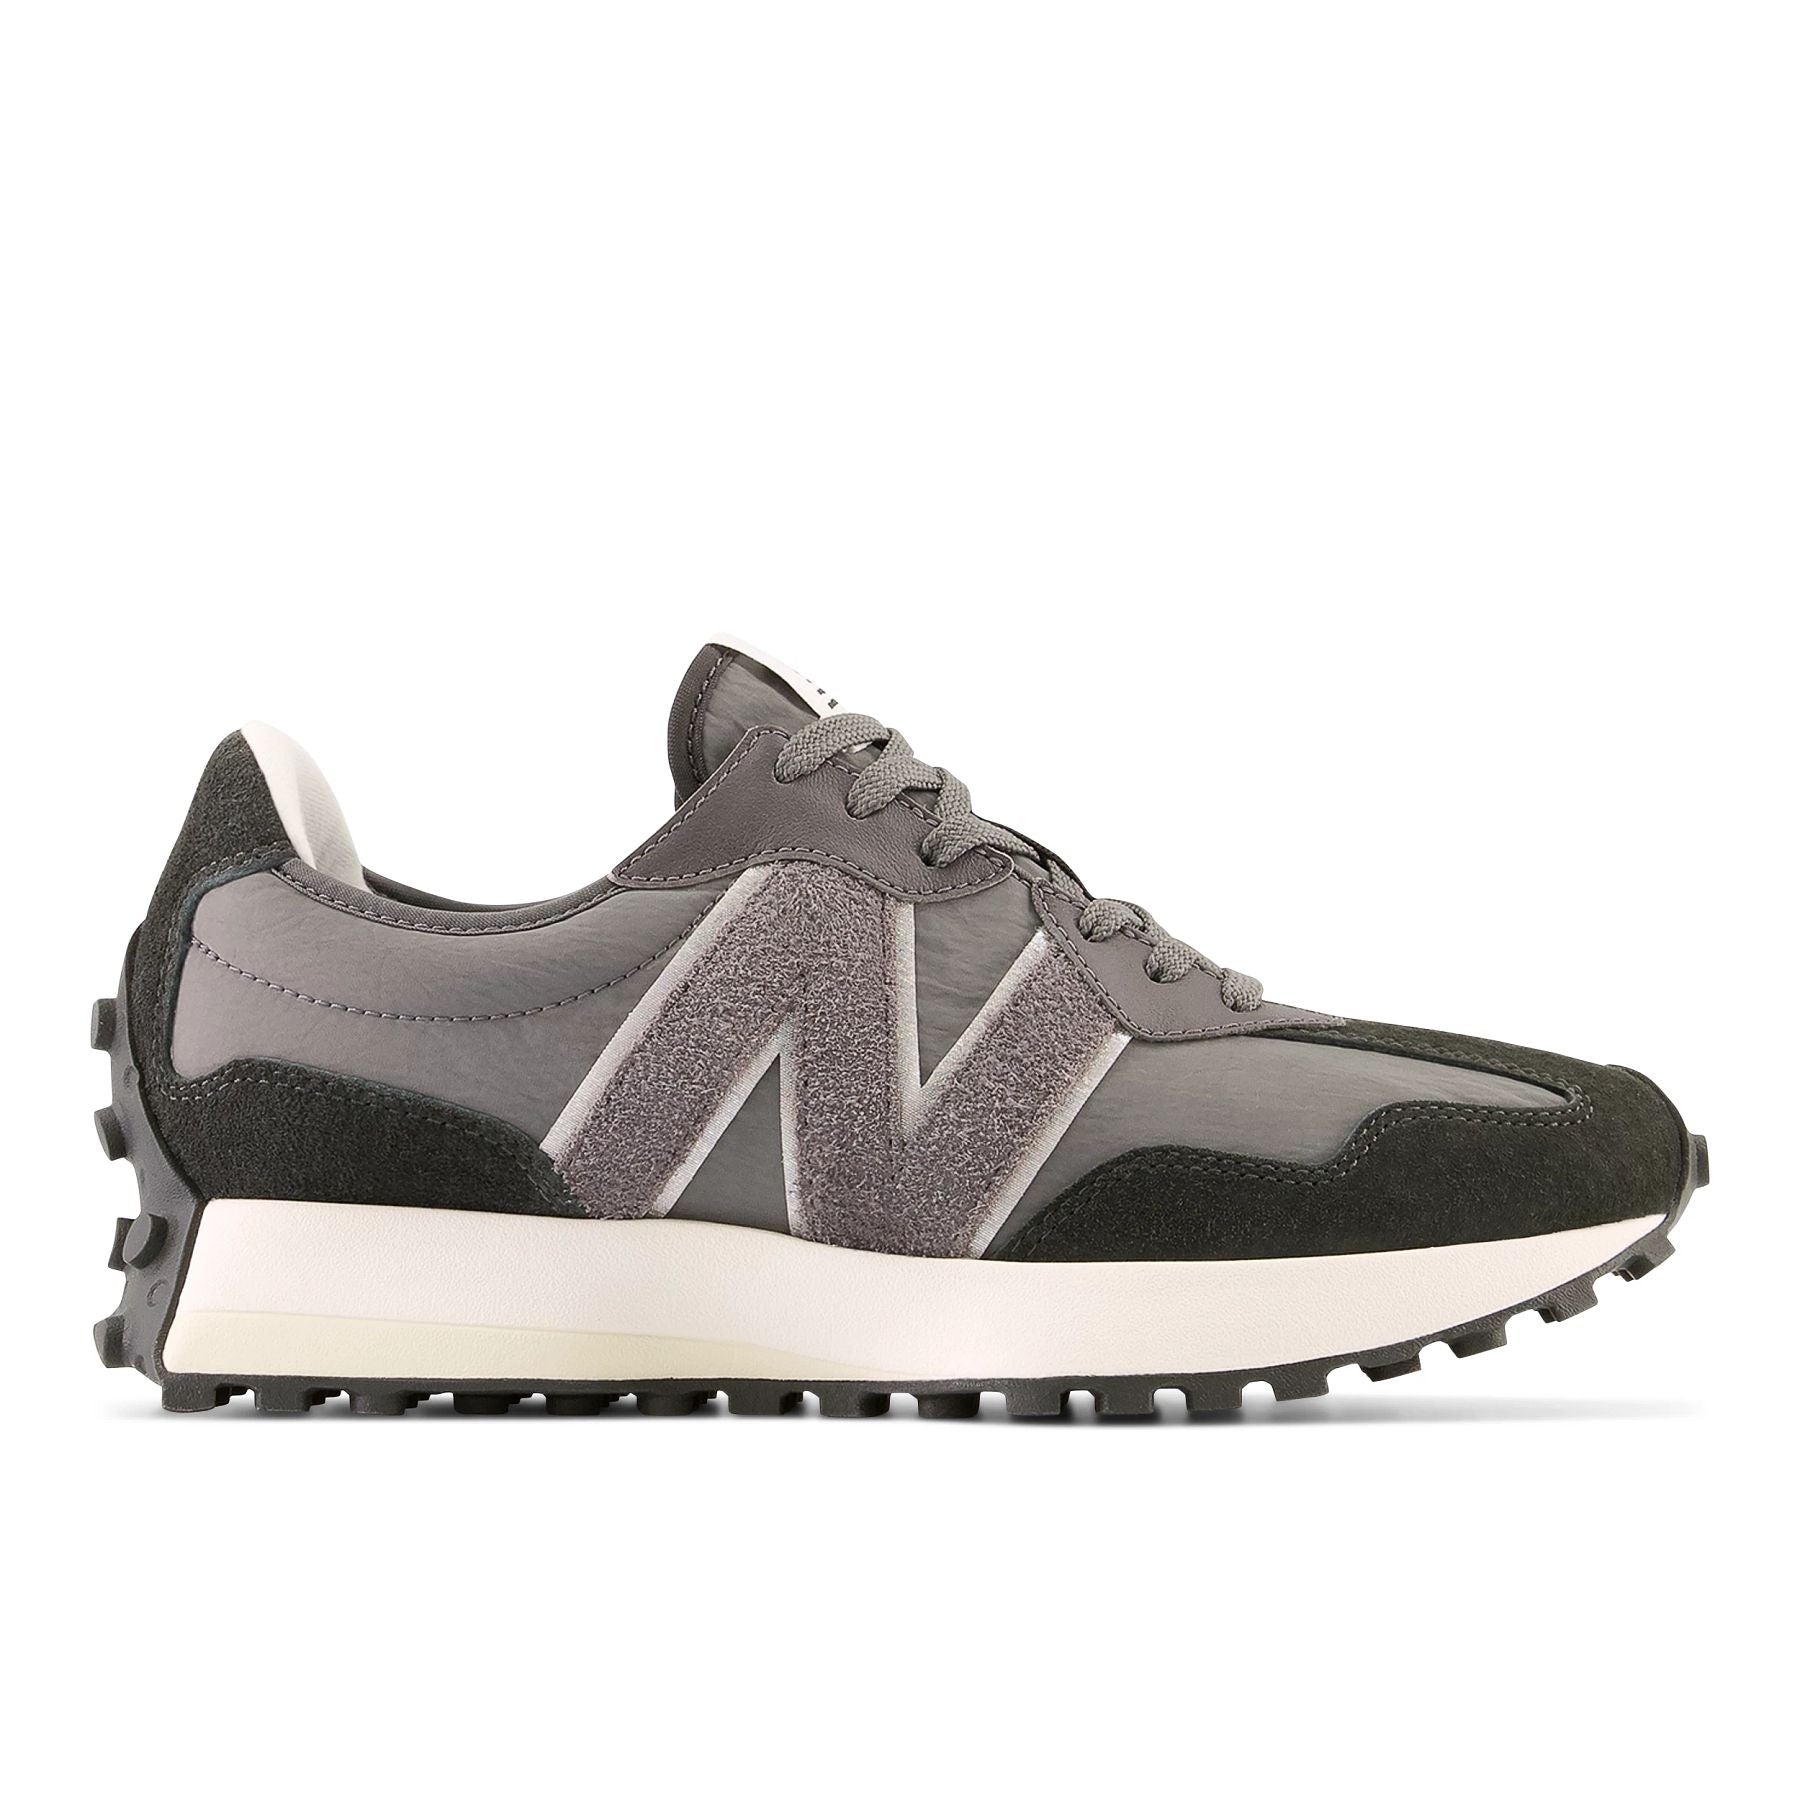 Lateral view of the Women's 327 by New Balance in Top/Castle